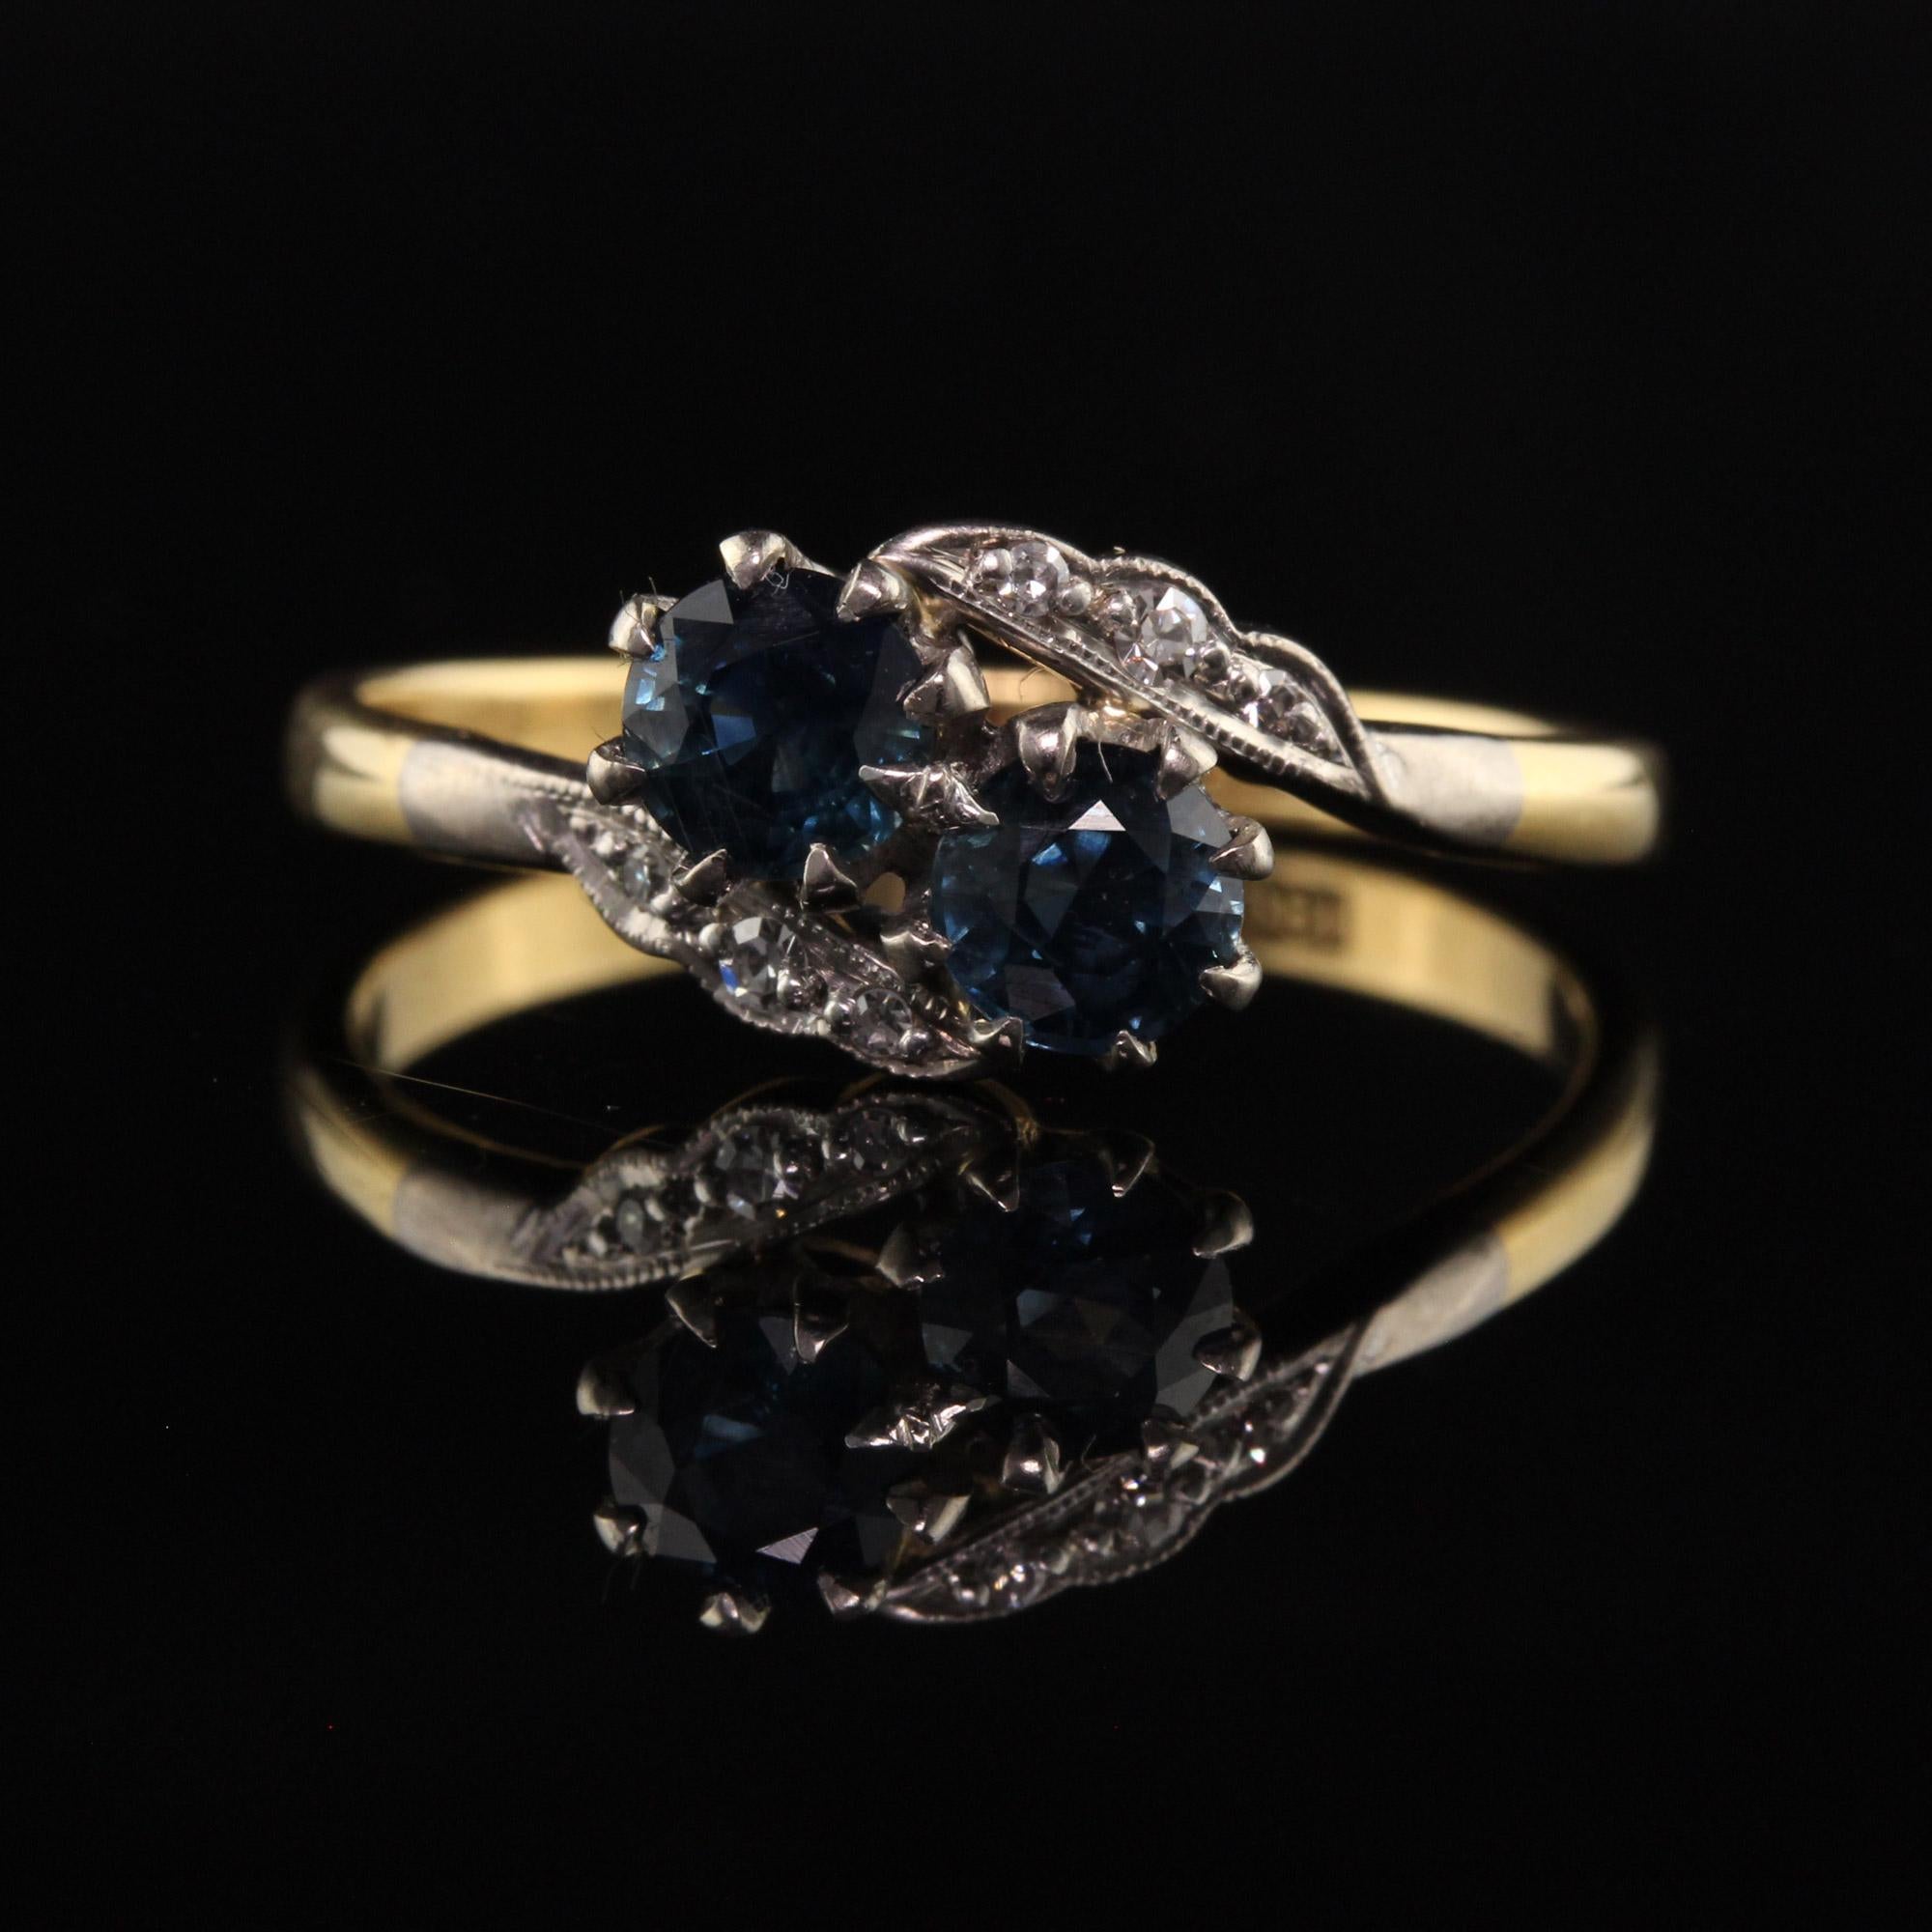 Antique Edwardian 18K Yellow Gold and Platinum Toi et Moi Sapphire Diamond Ring In Good Condition For Sale In Great Neck, NY